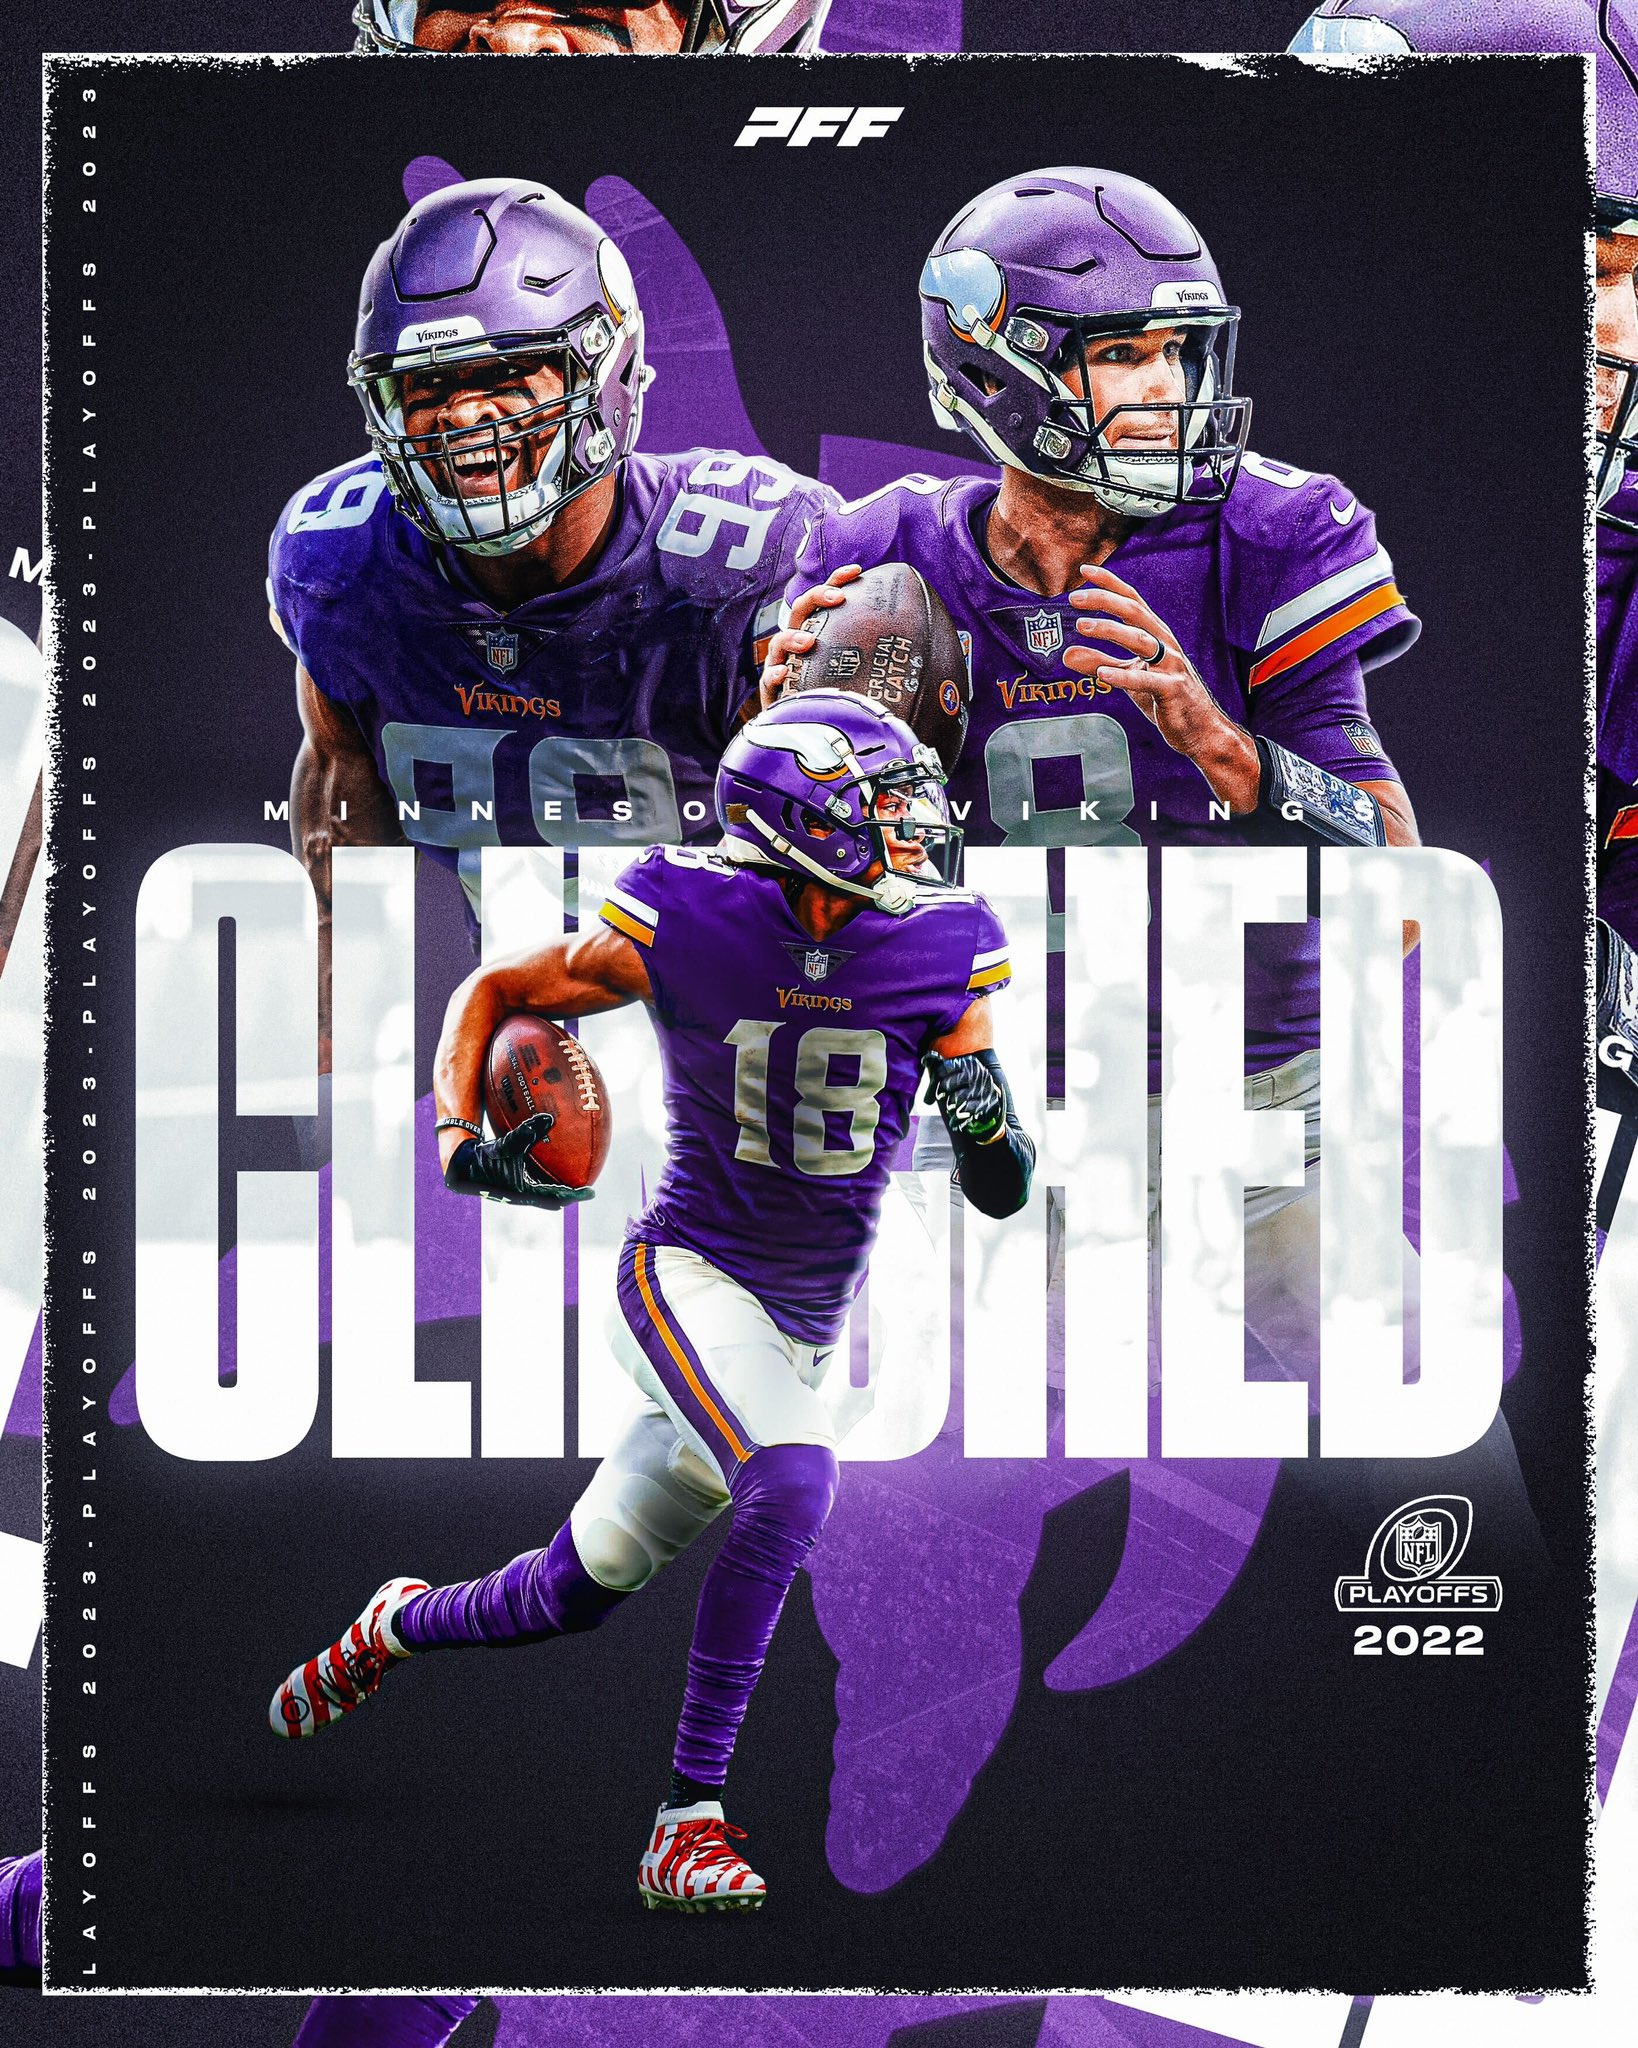 PFF on X: 'THE VIKINGS CLINCH THE DIVISION WITH THE BIGGEST